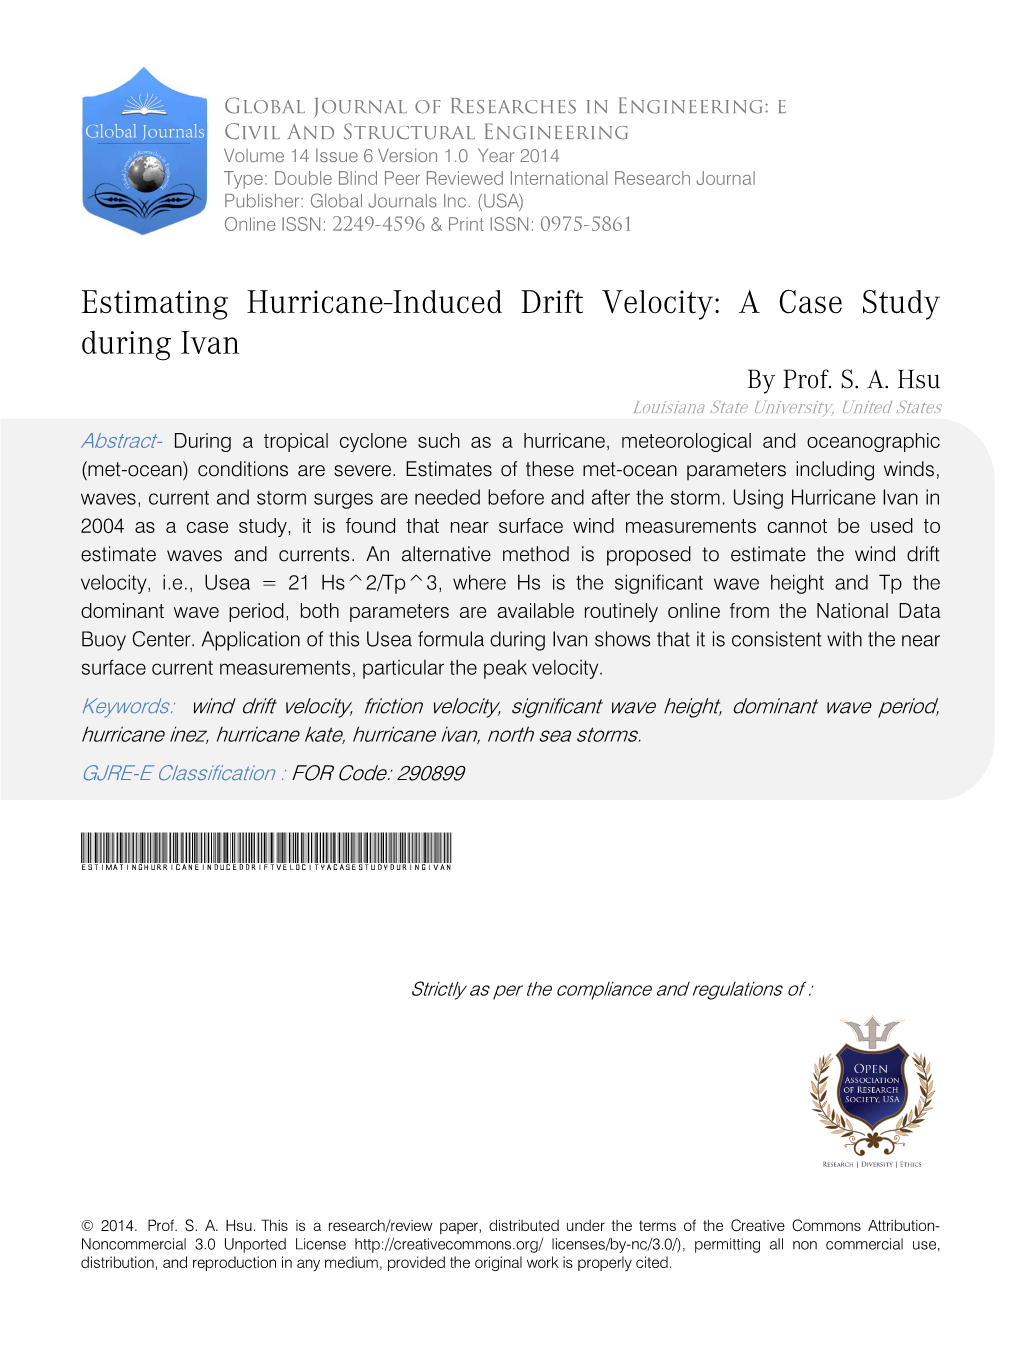 Estimating Hurricane-Induced Drift Velocity: a Case Study During Ivan by Prof